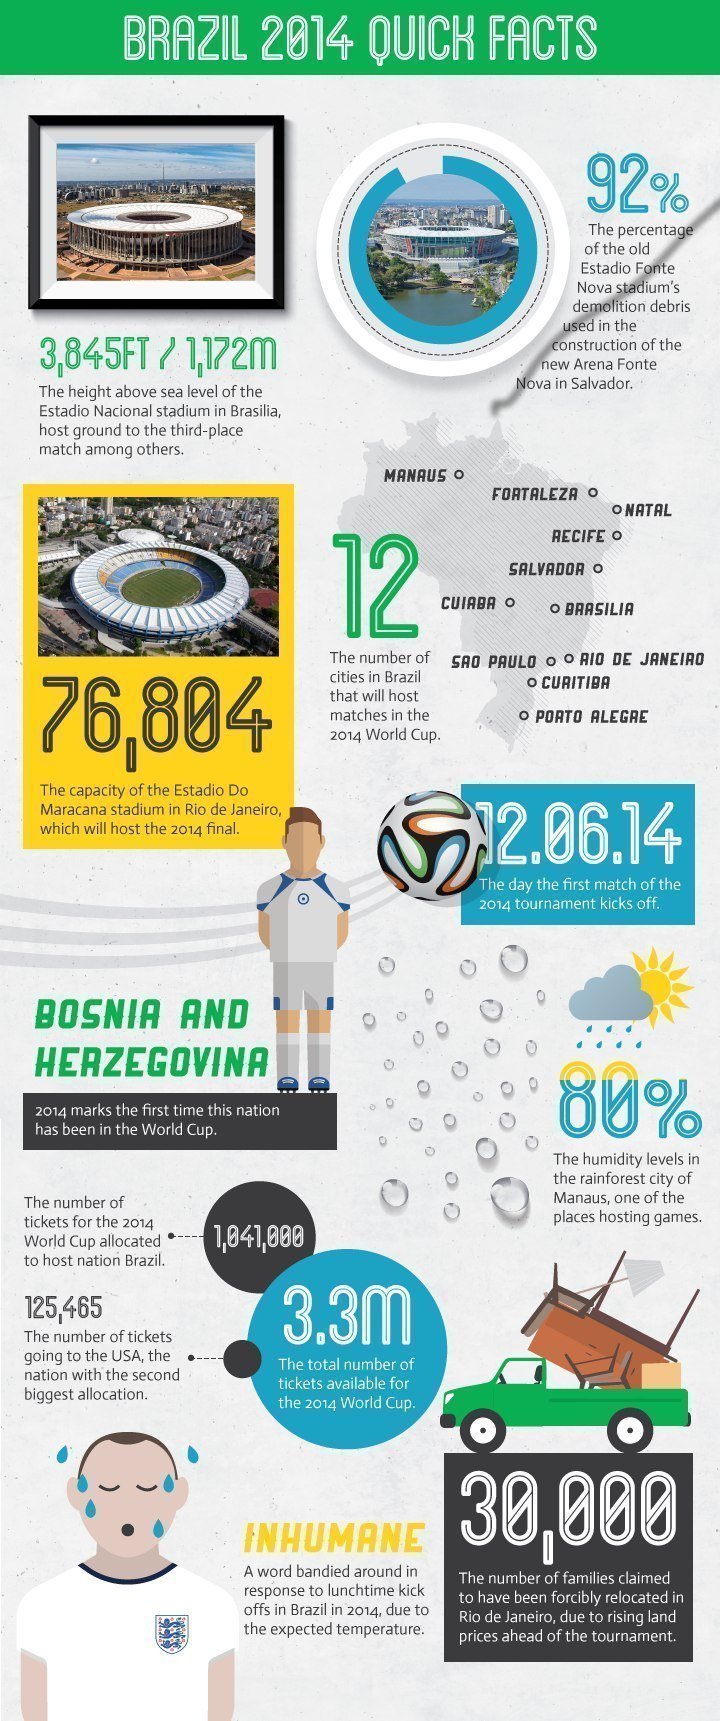 Brazil 2014 Quick Facts